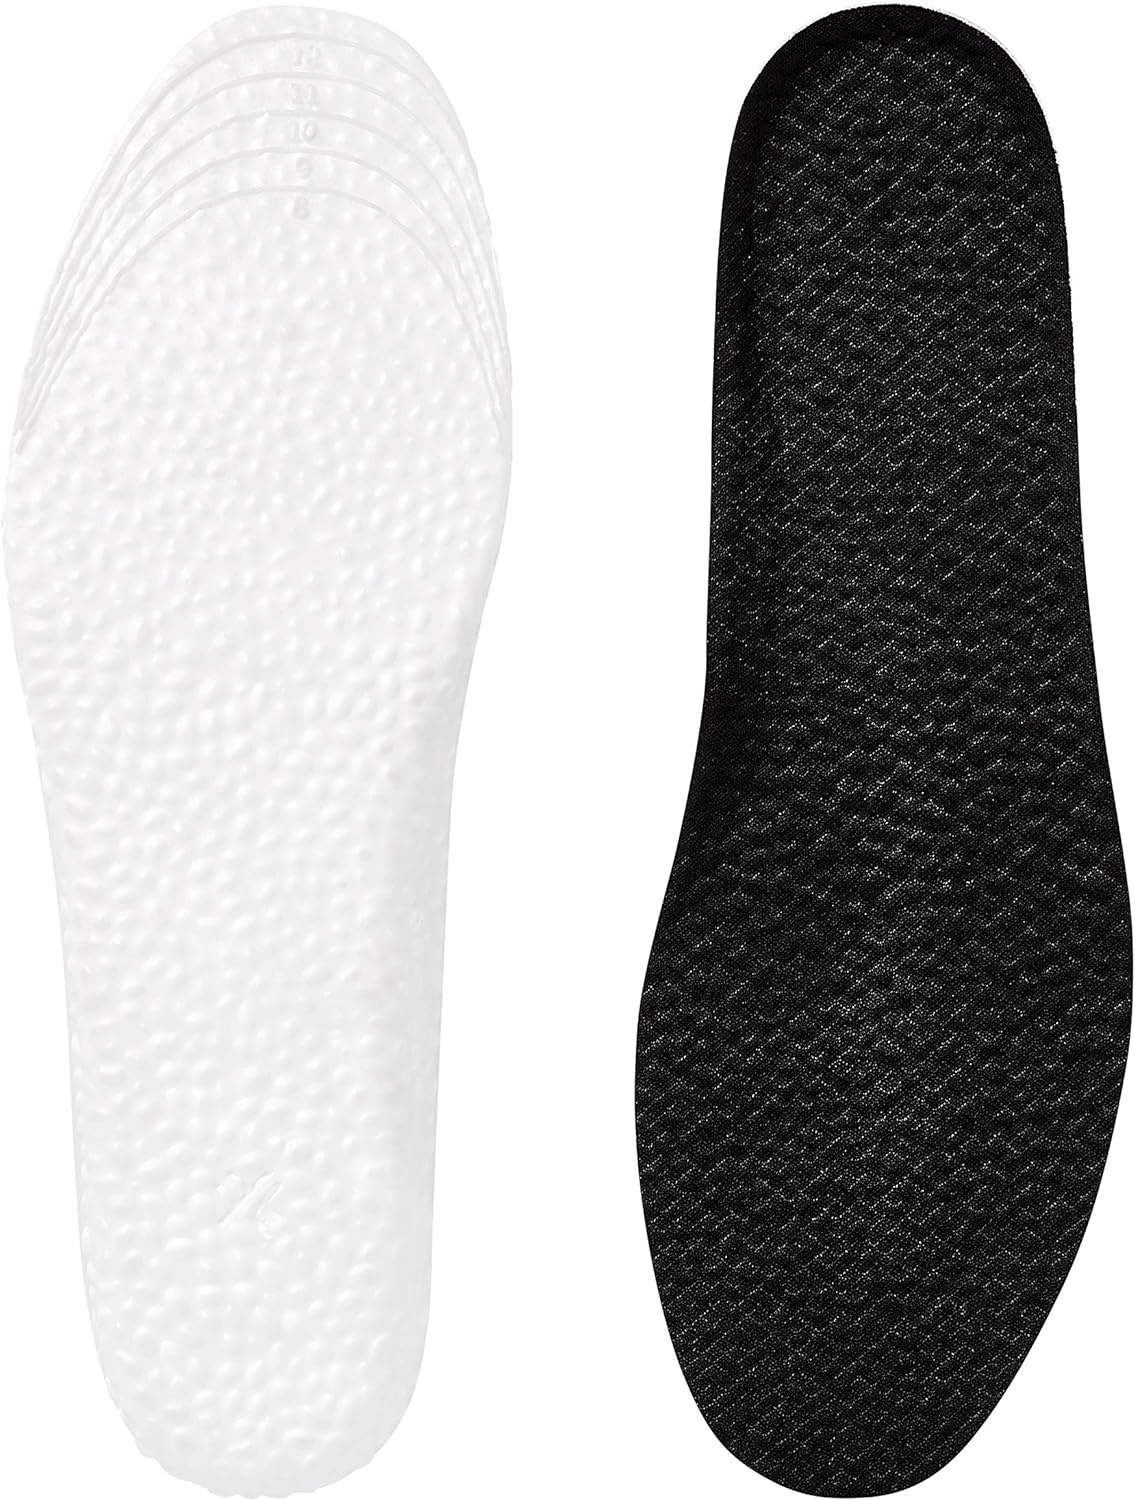 Comfort Starter Insoles // All Day Support, Relieve Foot Pain (Midnight Black, US 7-13)